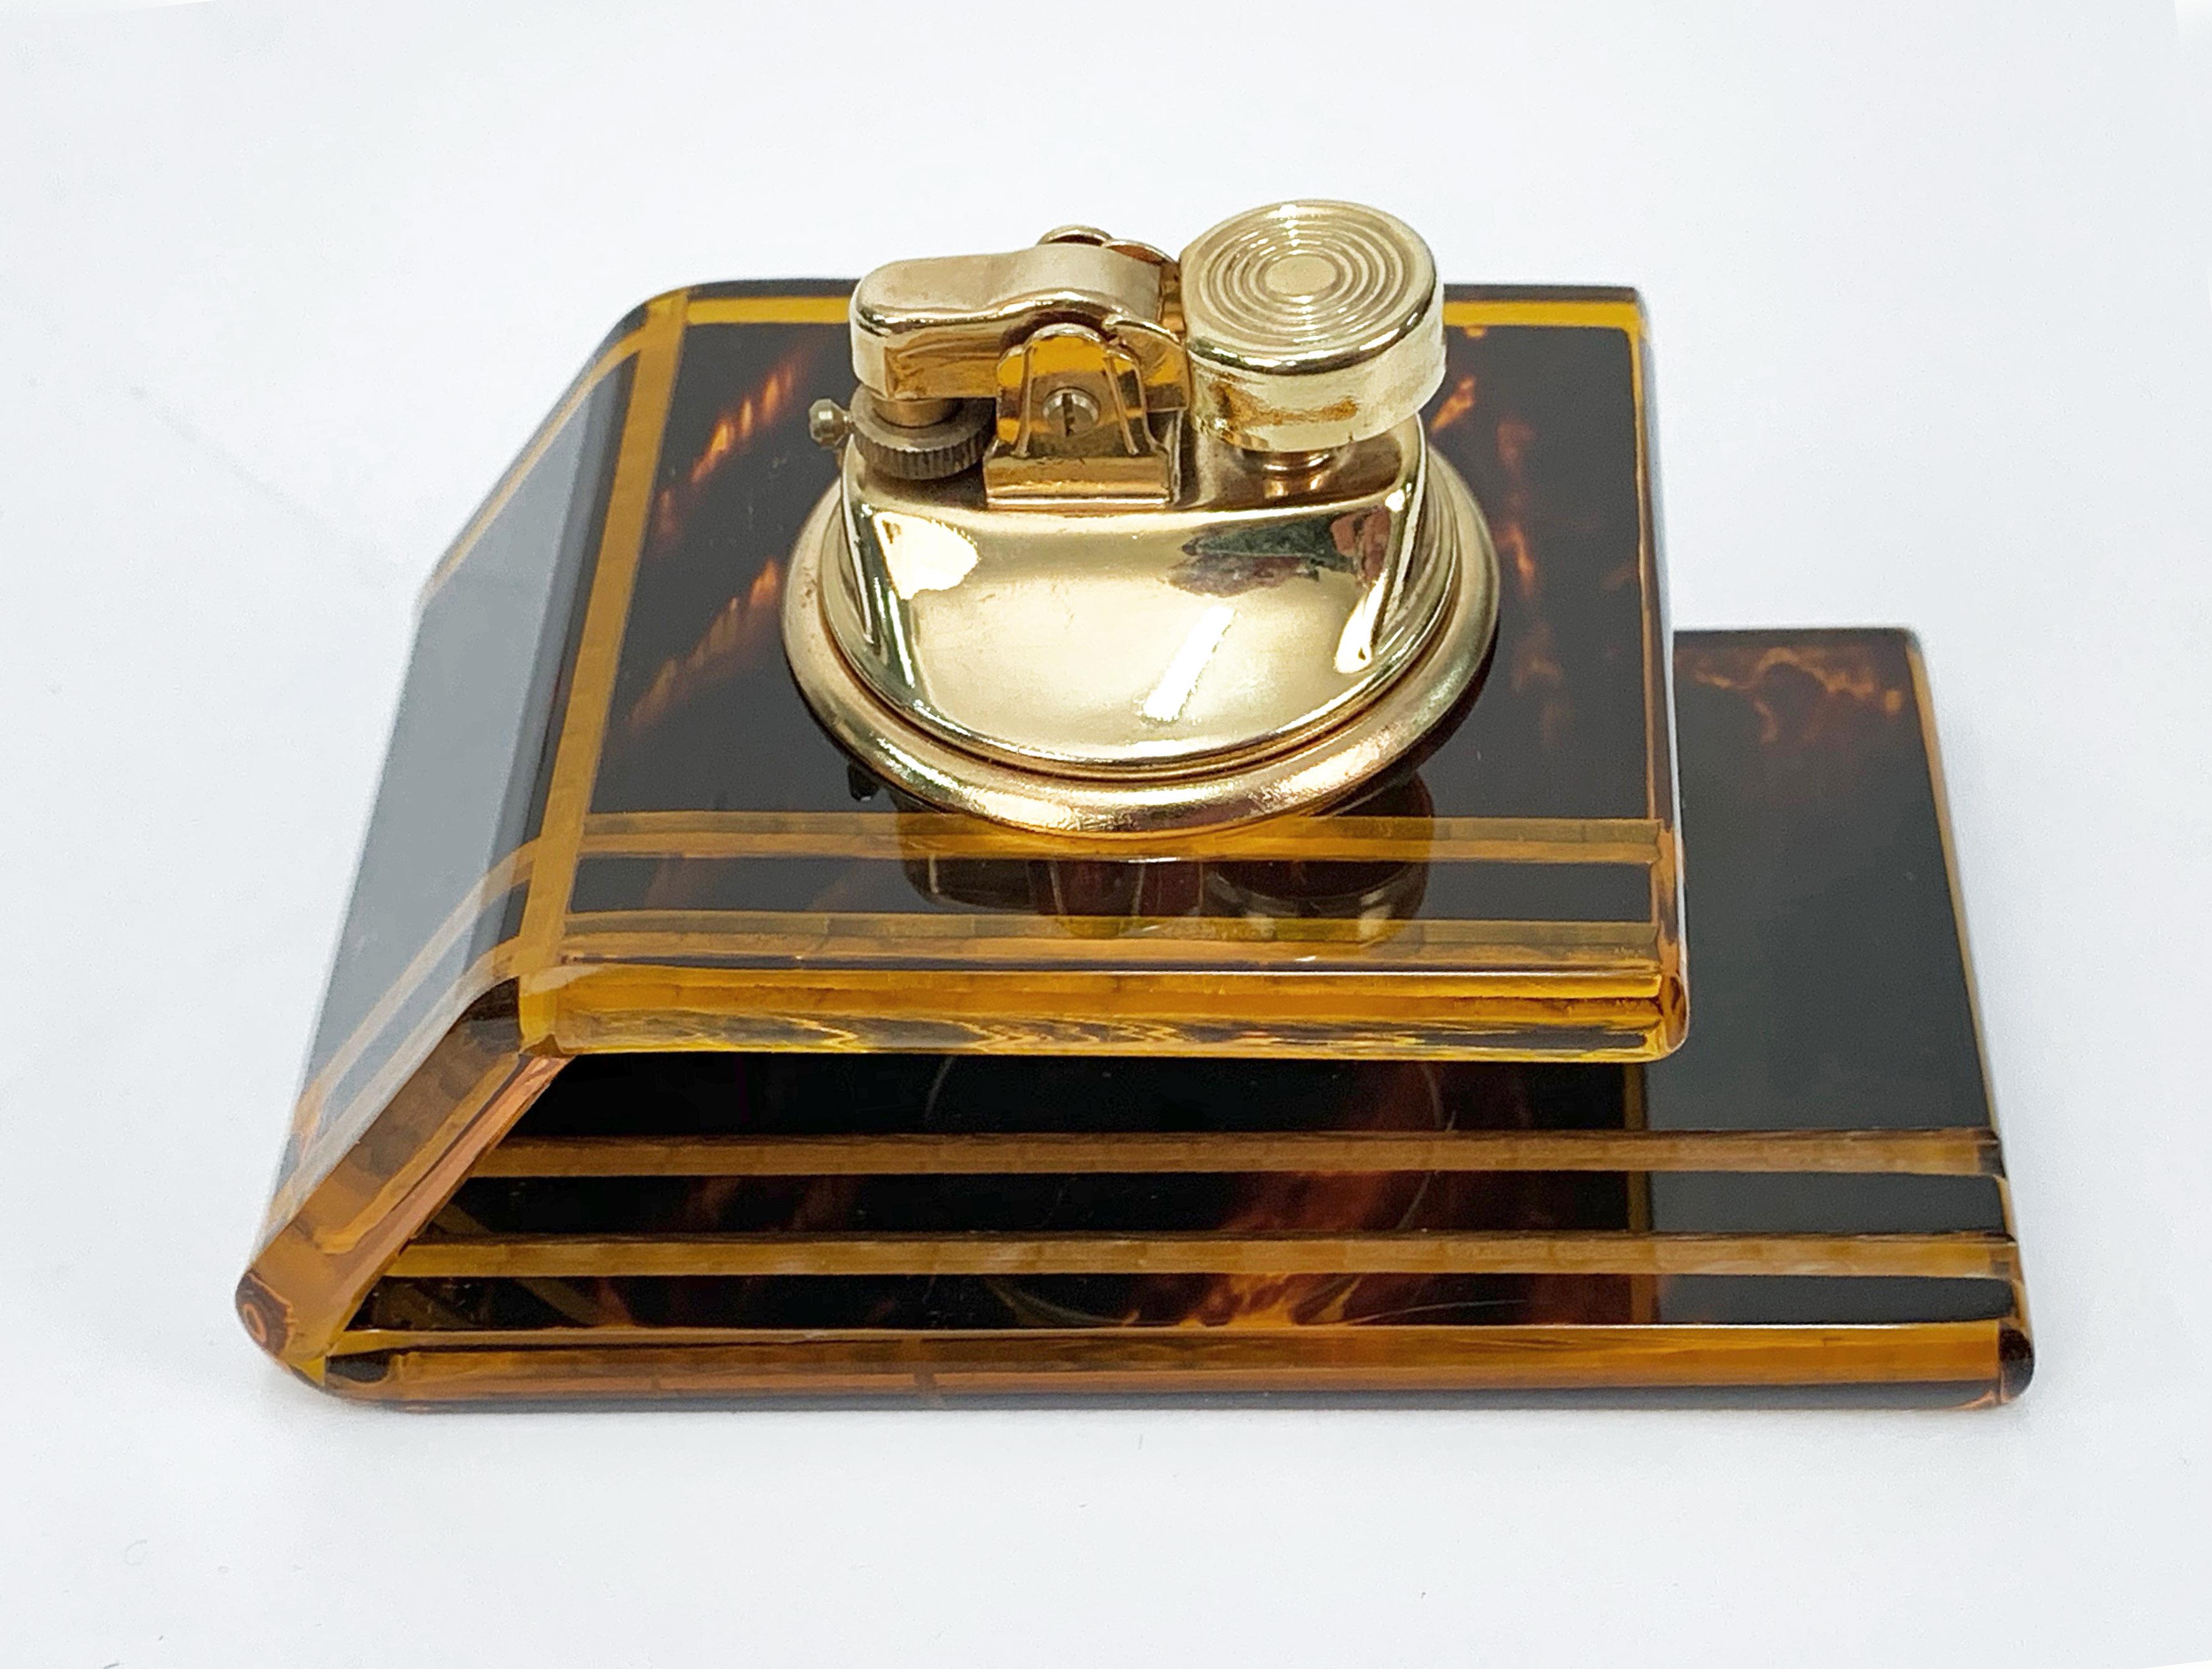 Amazing table lighter in Lucite, tortoise Plexiglas and brass. Attributed to Christian Dior and produced in France during 1970s.

The item has a never-ending charm due to not having been used. It has wonderful squared lines, blunted on the